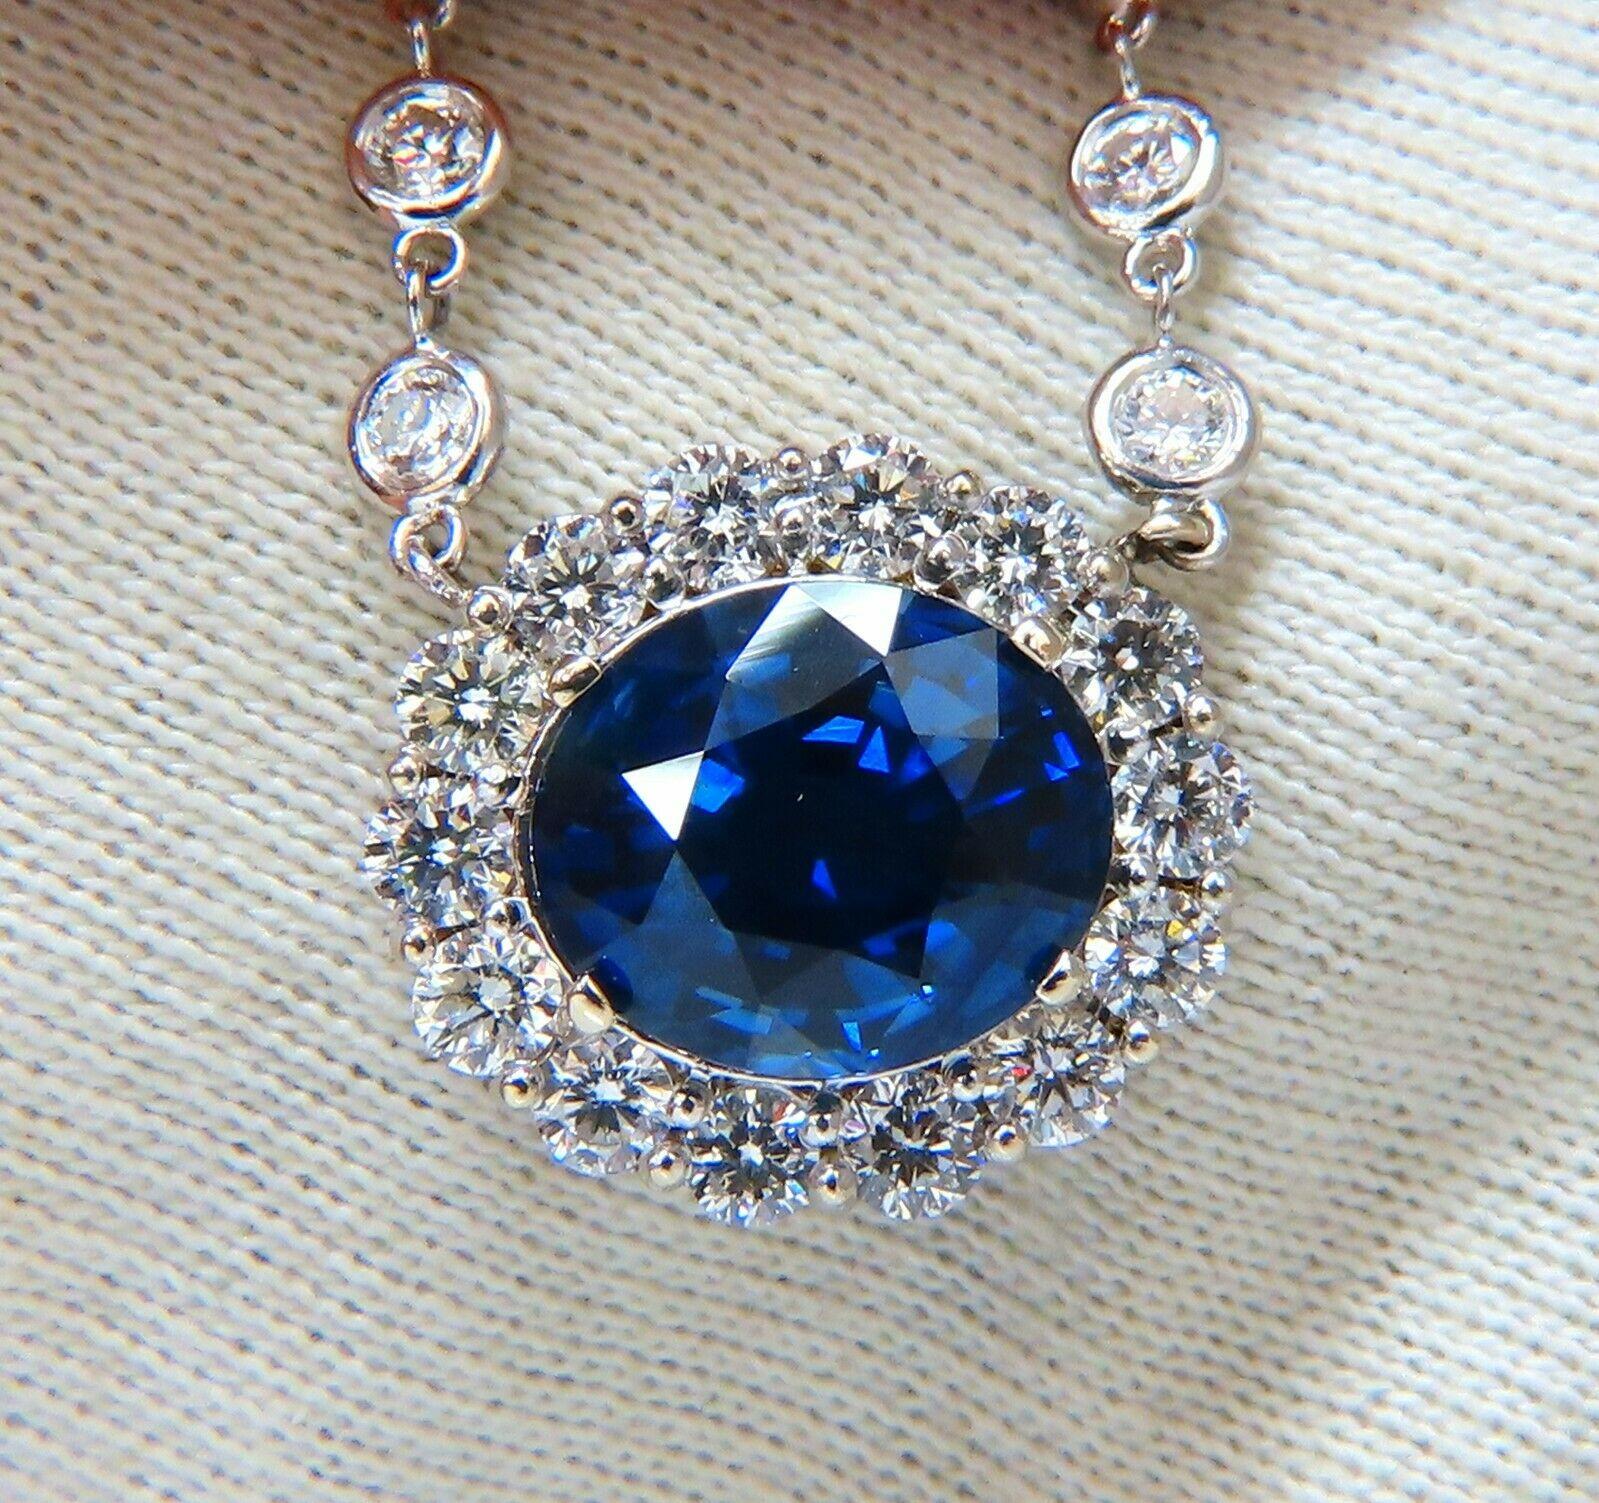 Sapphire Cluster Halo Linked

No Heat, Royal Blue Oval sapphire Necklace

7.53ct. GIA Certified

Report: 2195954751

Natural, No Enhancements.

Royal Blue & Transparent 

VS Clean Clarity.

12.71 X 10.84 X 6.61mm

3.00ct side natural round